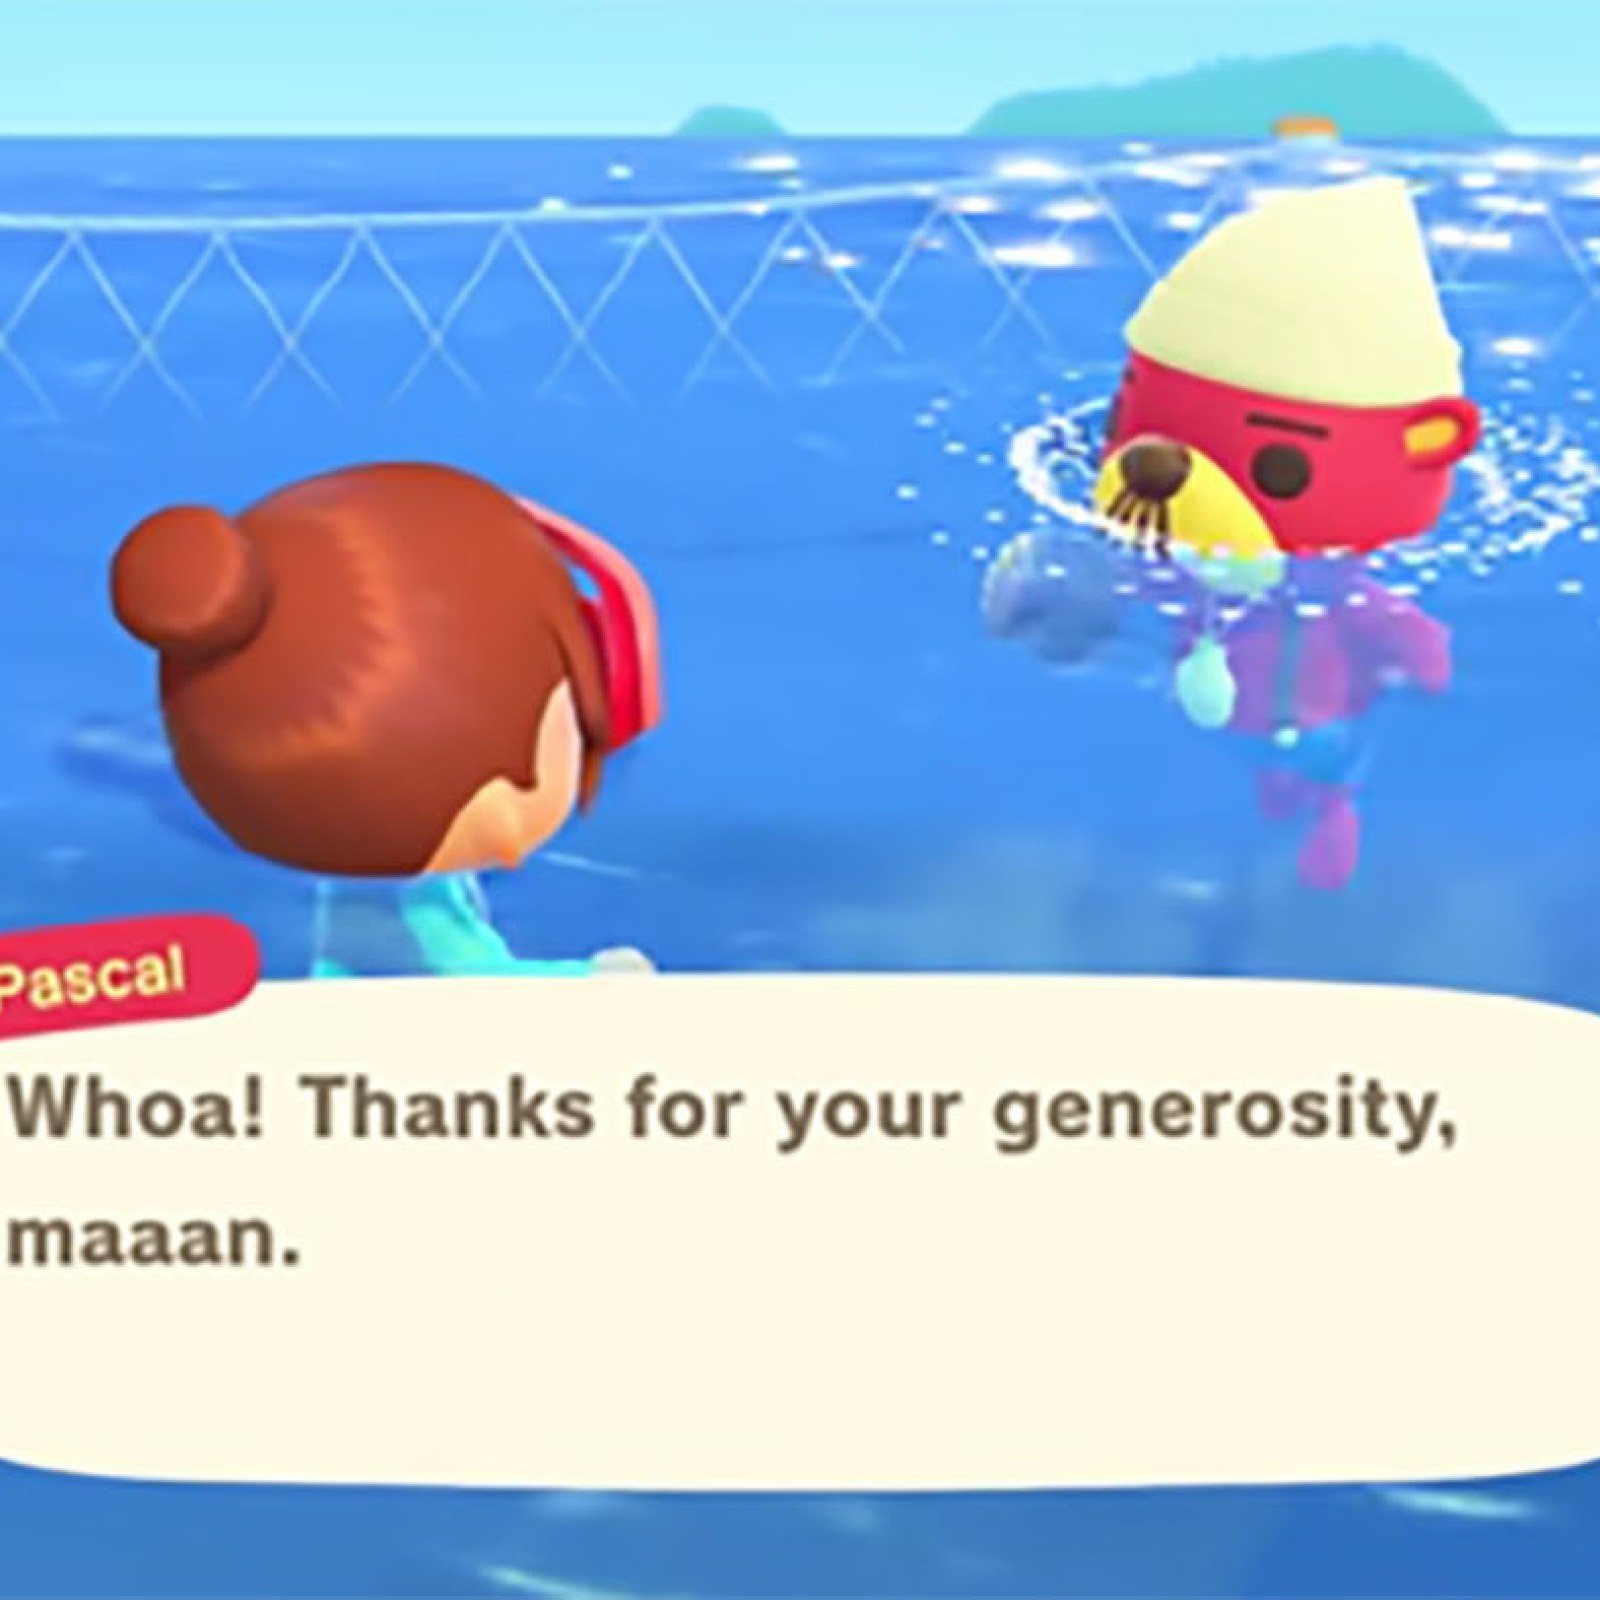 Animal Crossing: New Horizons' Pascal Guide: Scallops, Pearls and More